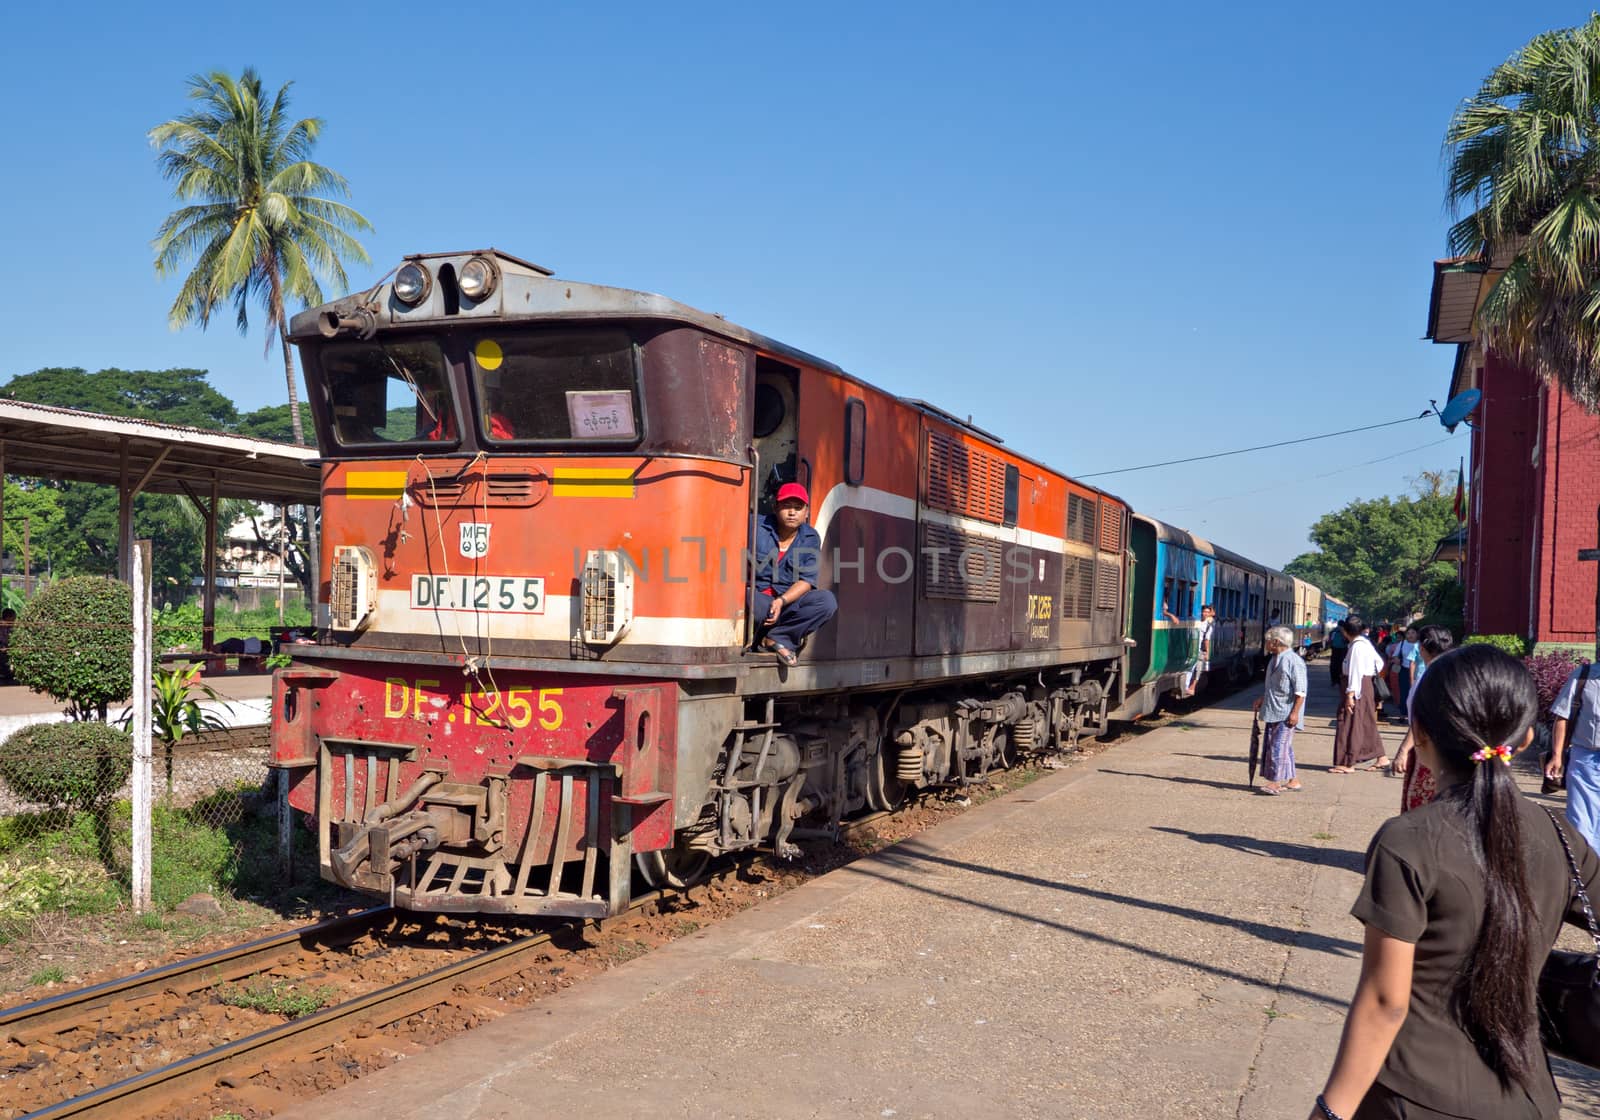 Yangon, Myanmar - November 13, 2014: Train arriving at Pan Hlaing Railway Station in Yangon, Myanmar. Myanmar has an extensive railway network, but trains and staitions are mostly old and run down.